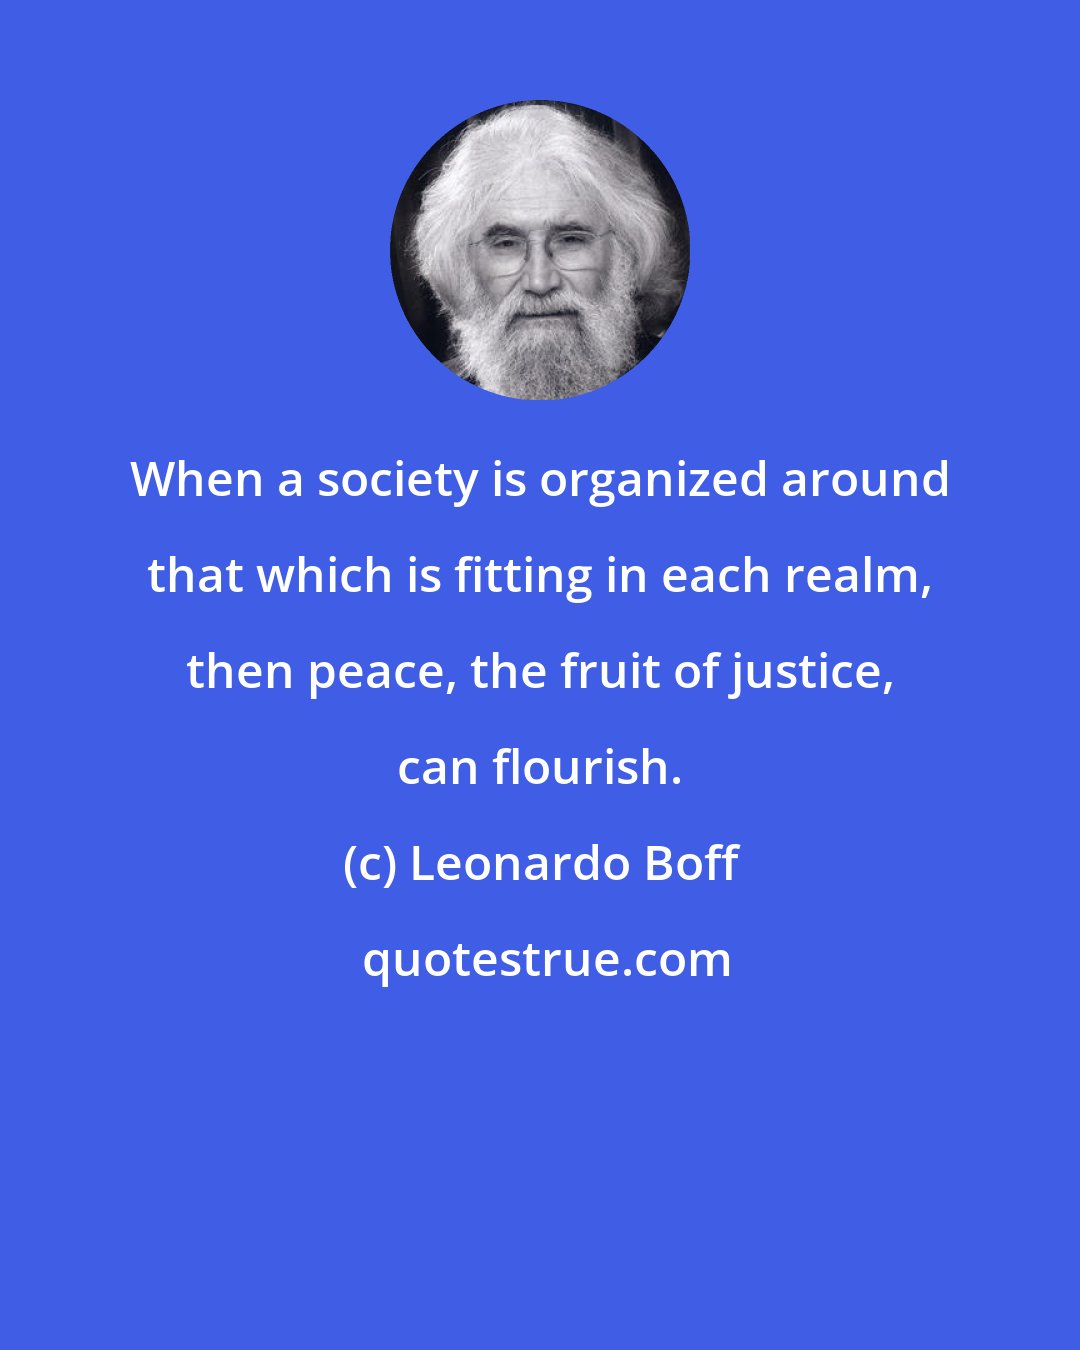 Leonardo Boff: When a society is organized around that which is fitting in each realm, then peace, the fruit of justice, can flourish.